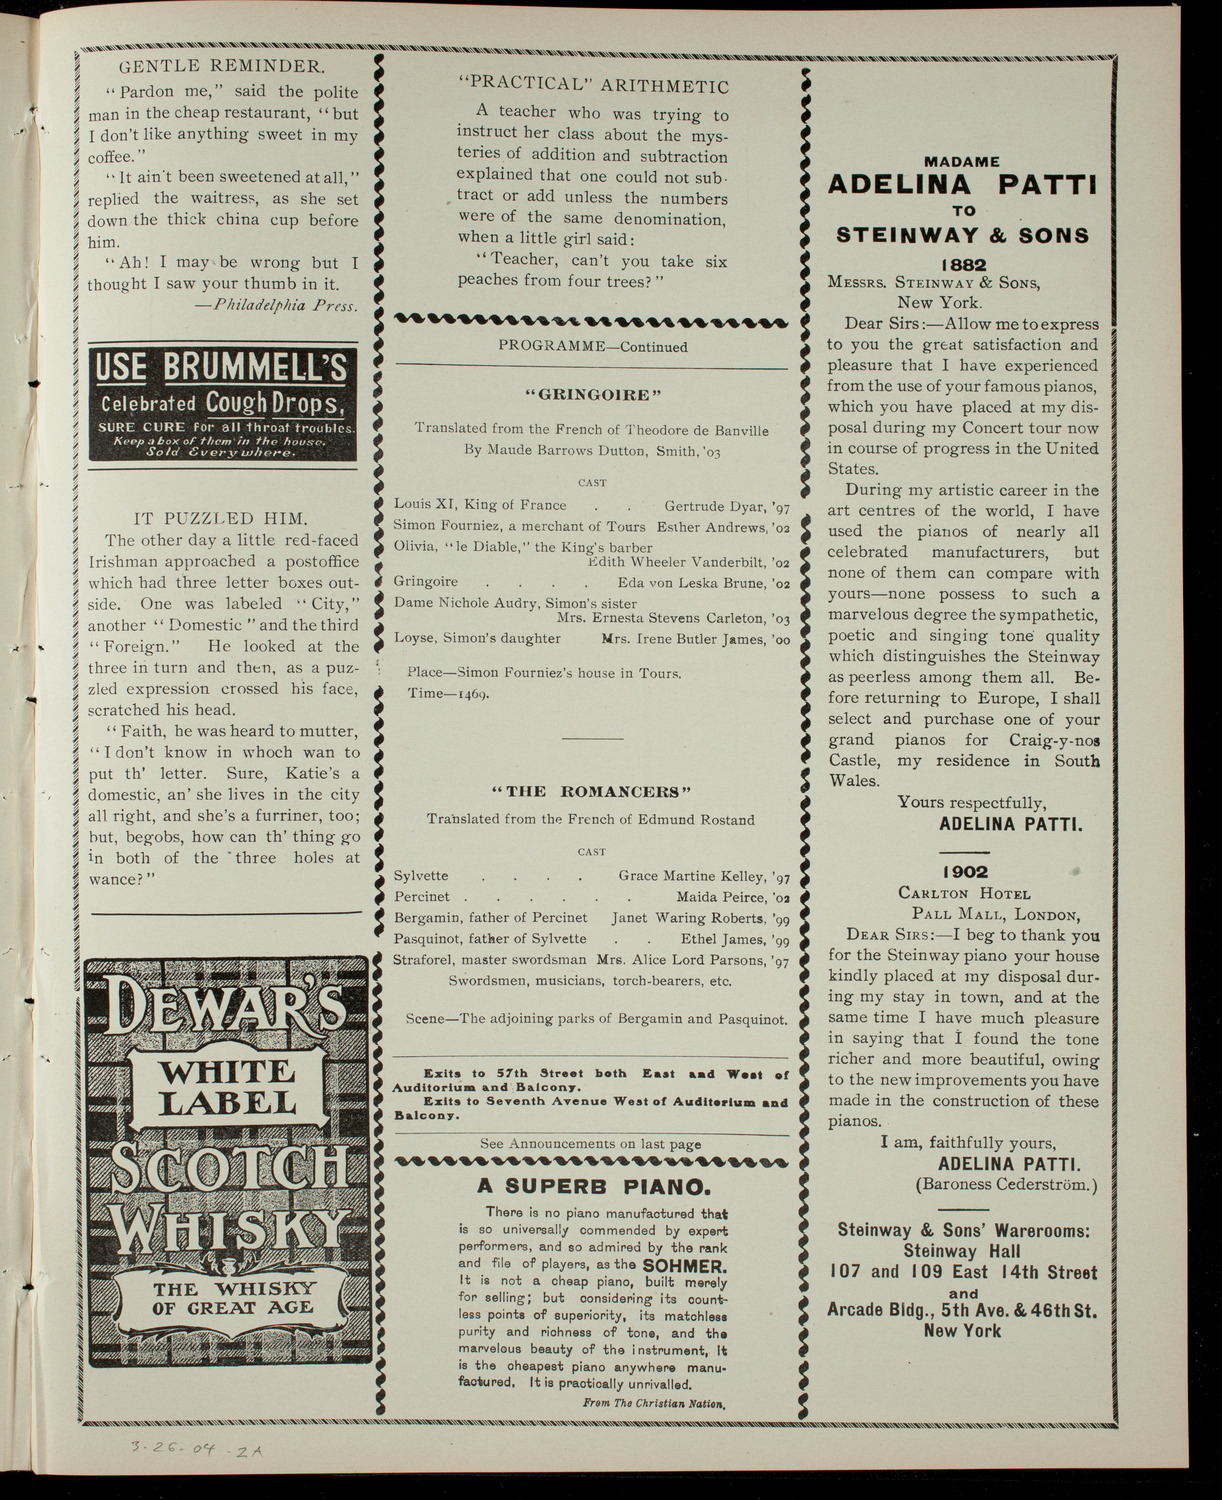 Smith College Theatre Club Benefit Performance for the Smith Students' Aid Society, March 26, 1904, program page 3